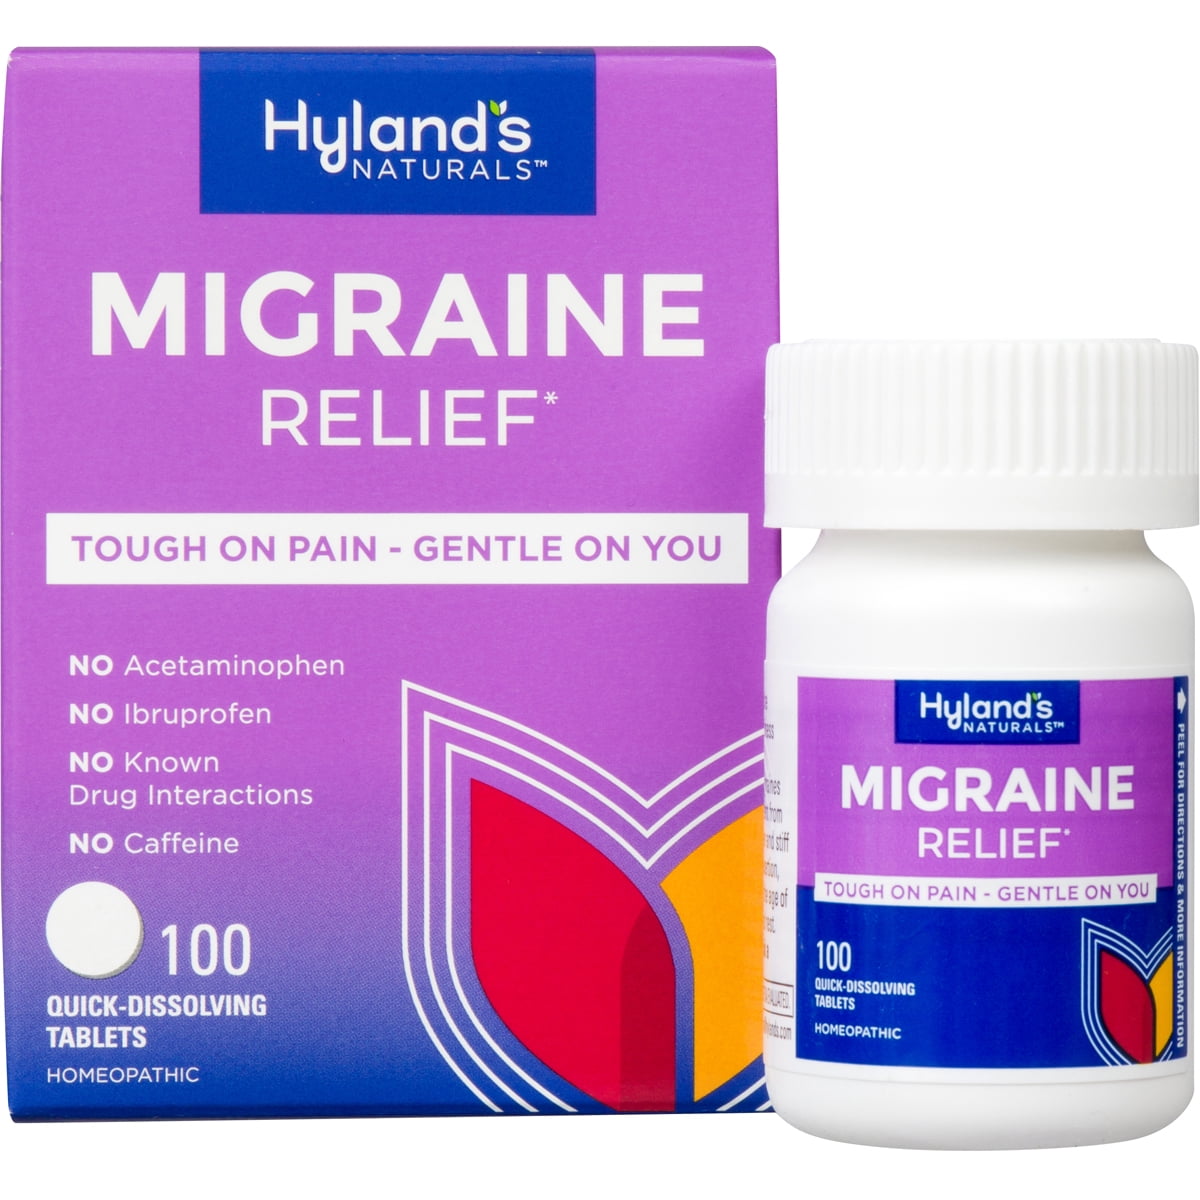 Hyland's Naturals Migraine Relief, Natural Pain Relief, 100 Tablets